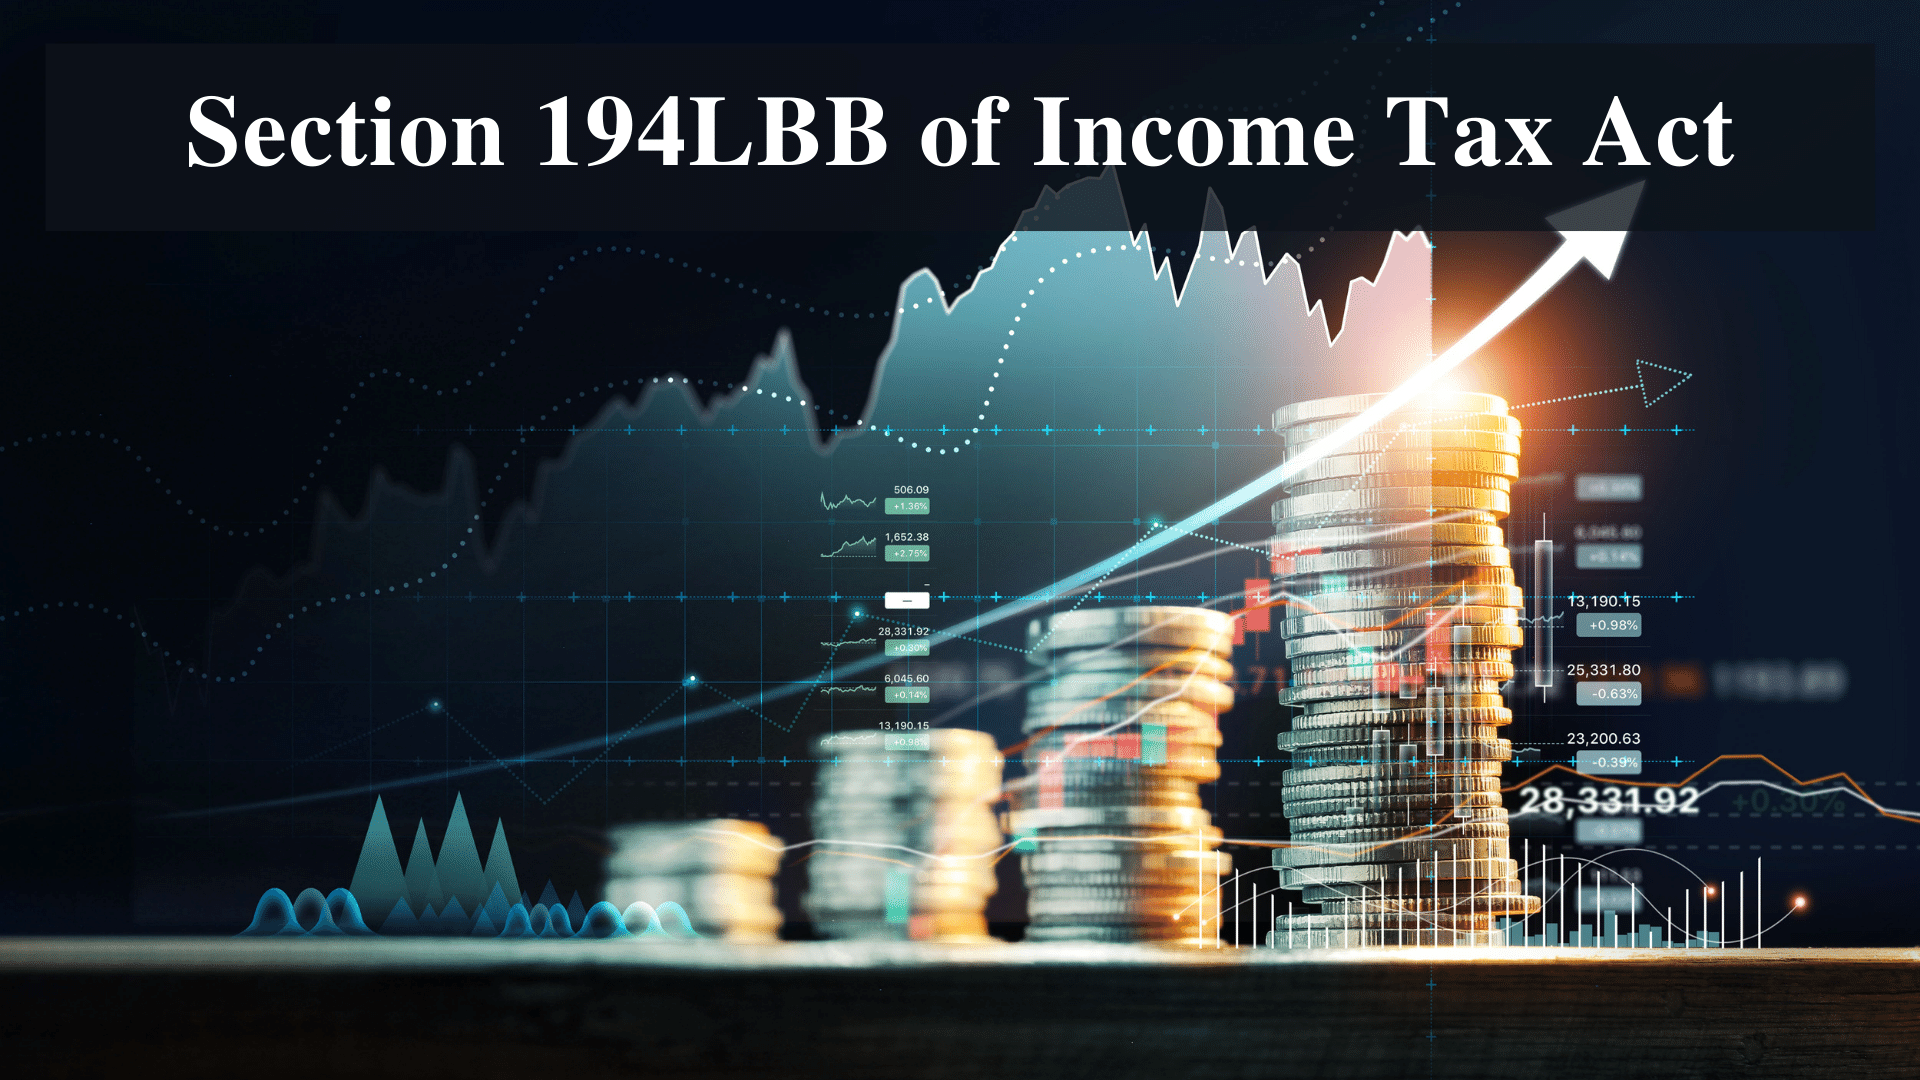 Section 194LBB of Income Tax Act